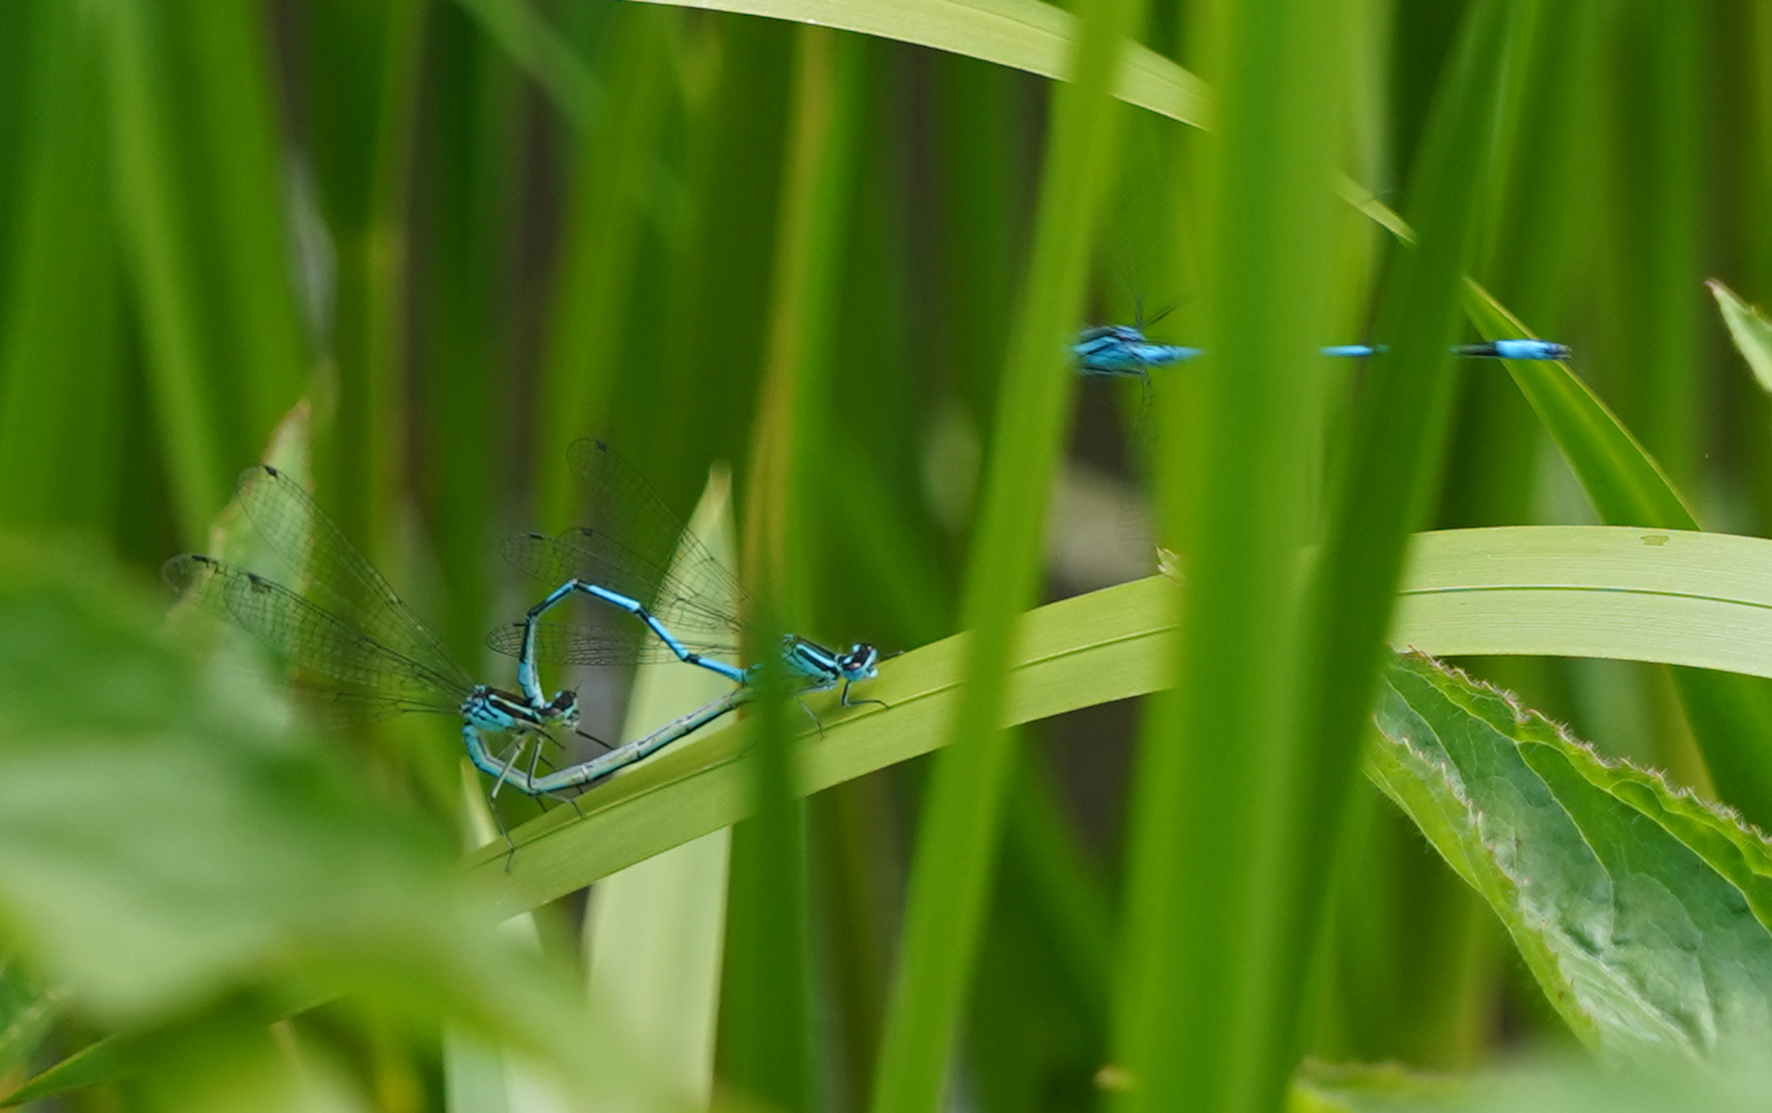 Dragonfly sits on leafblade